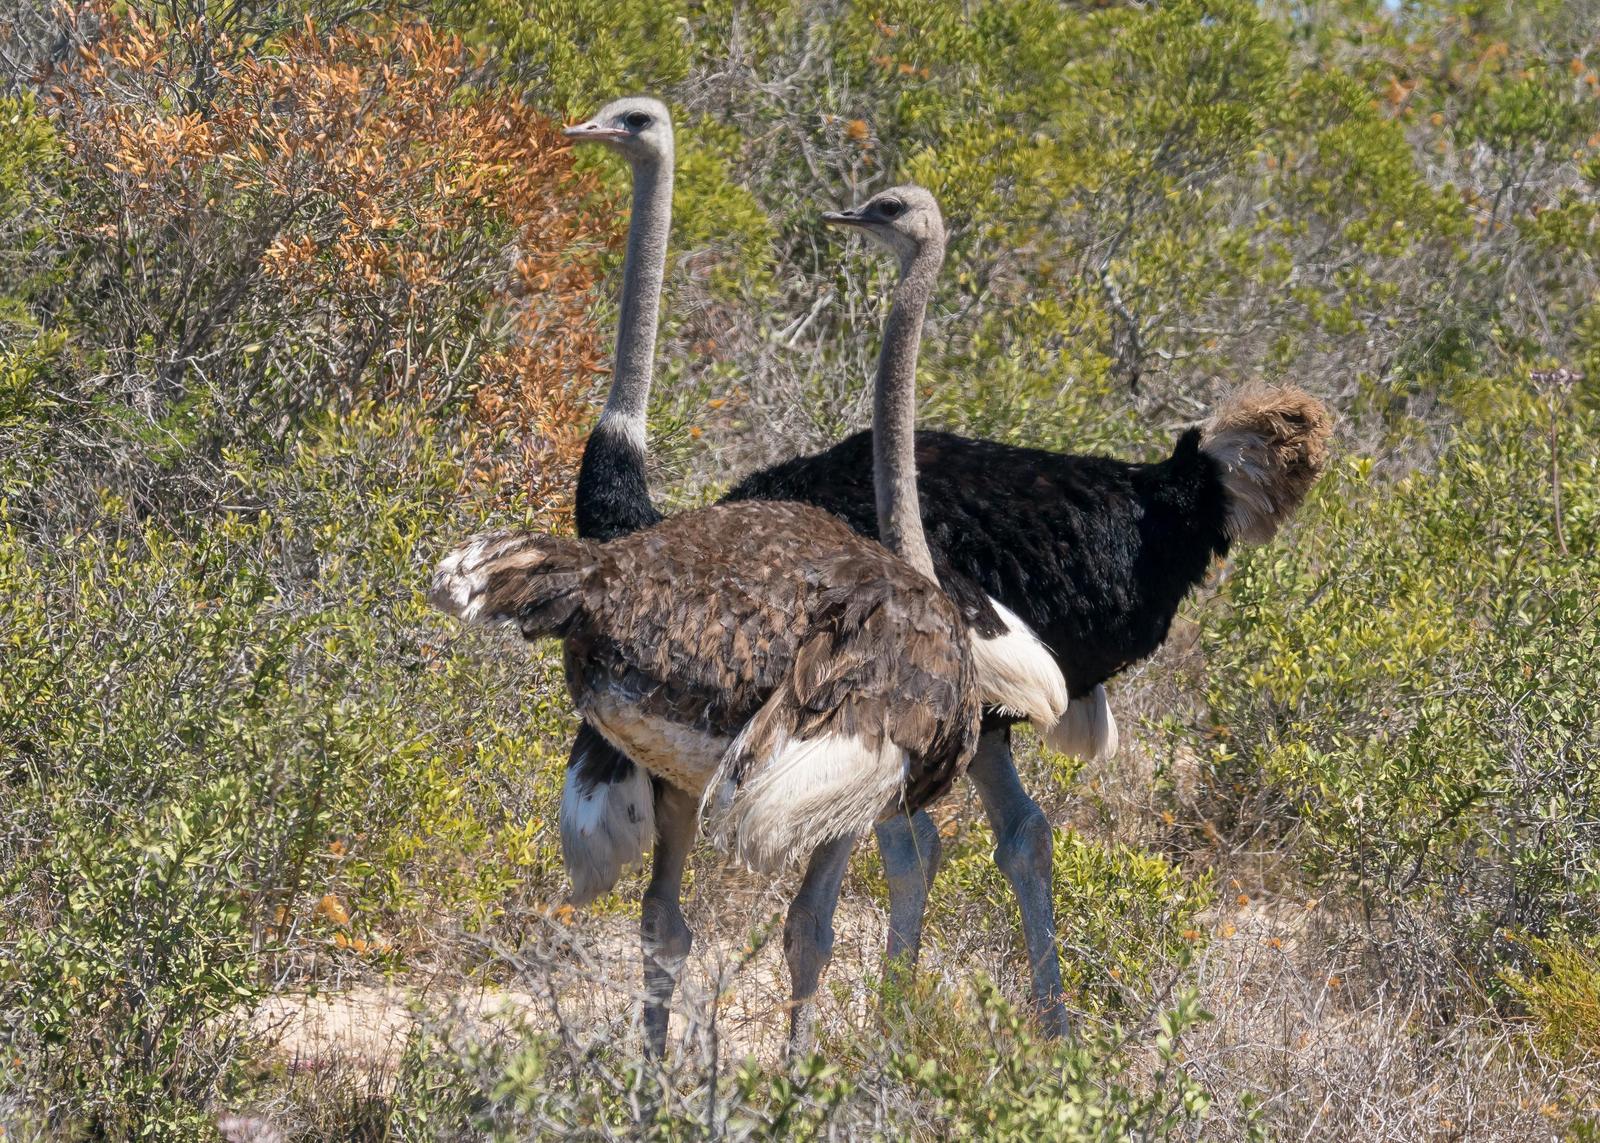 Common Ostrich Photo by Gerald Hoekstra